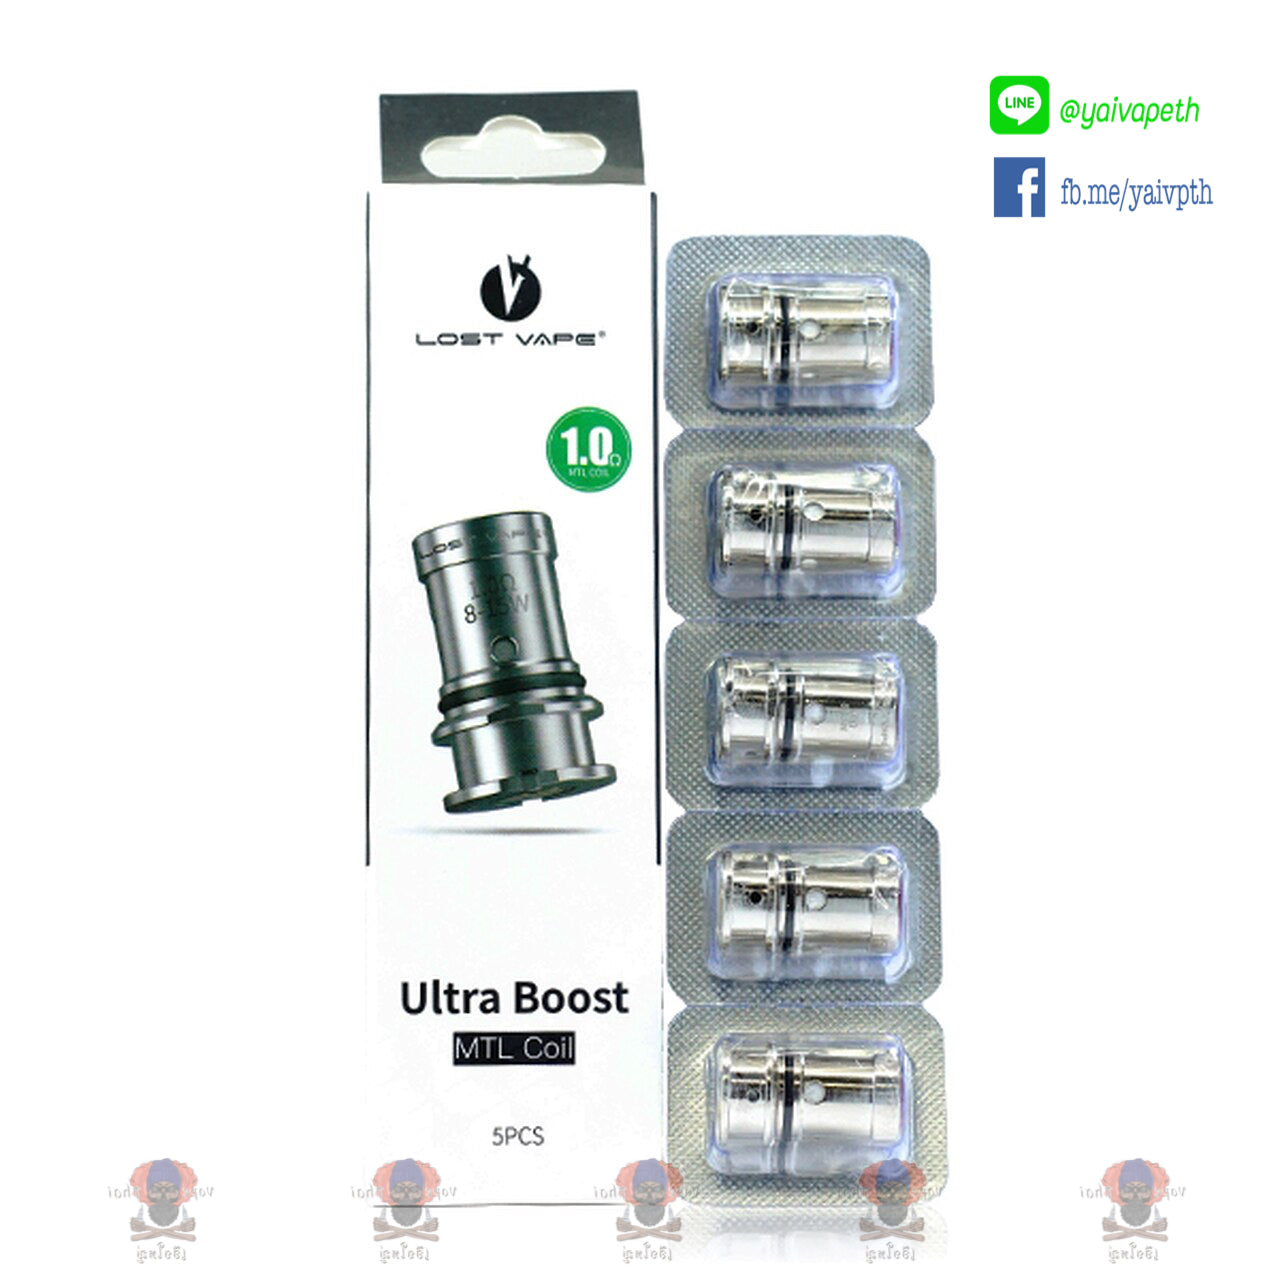 LOST VAPE ULTRA BOOST REPLACEMENT COILS ( 0.3, 0.6, 1.0 ohm) - YAIVAPETHAI  No.1